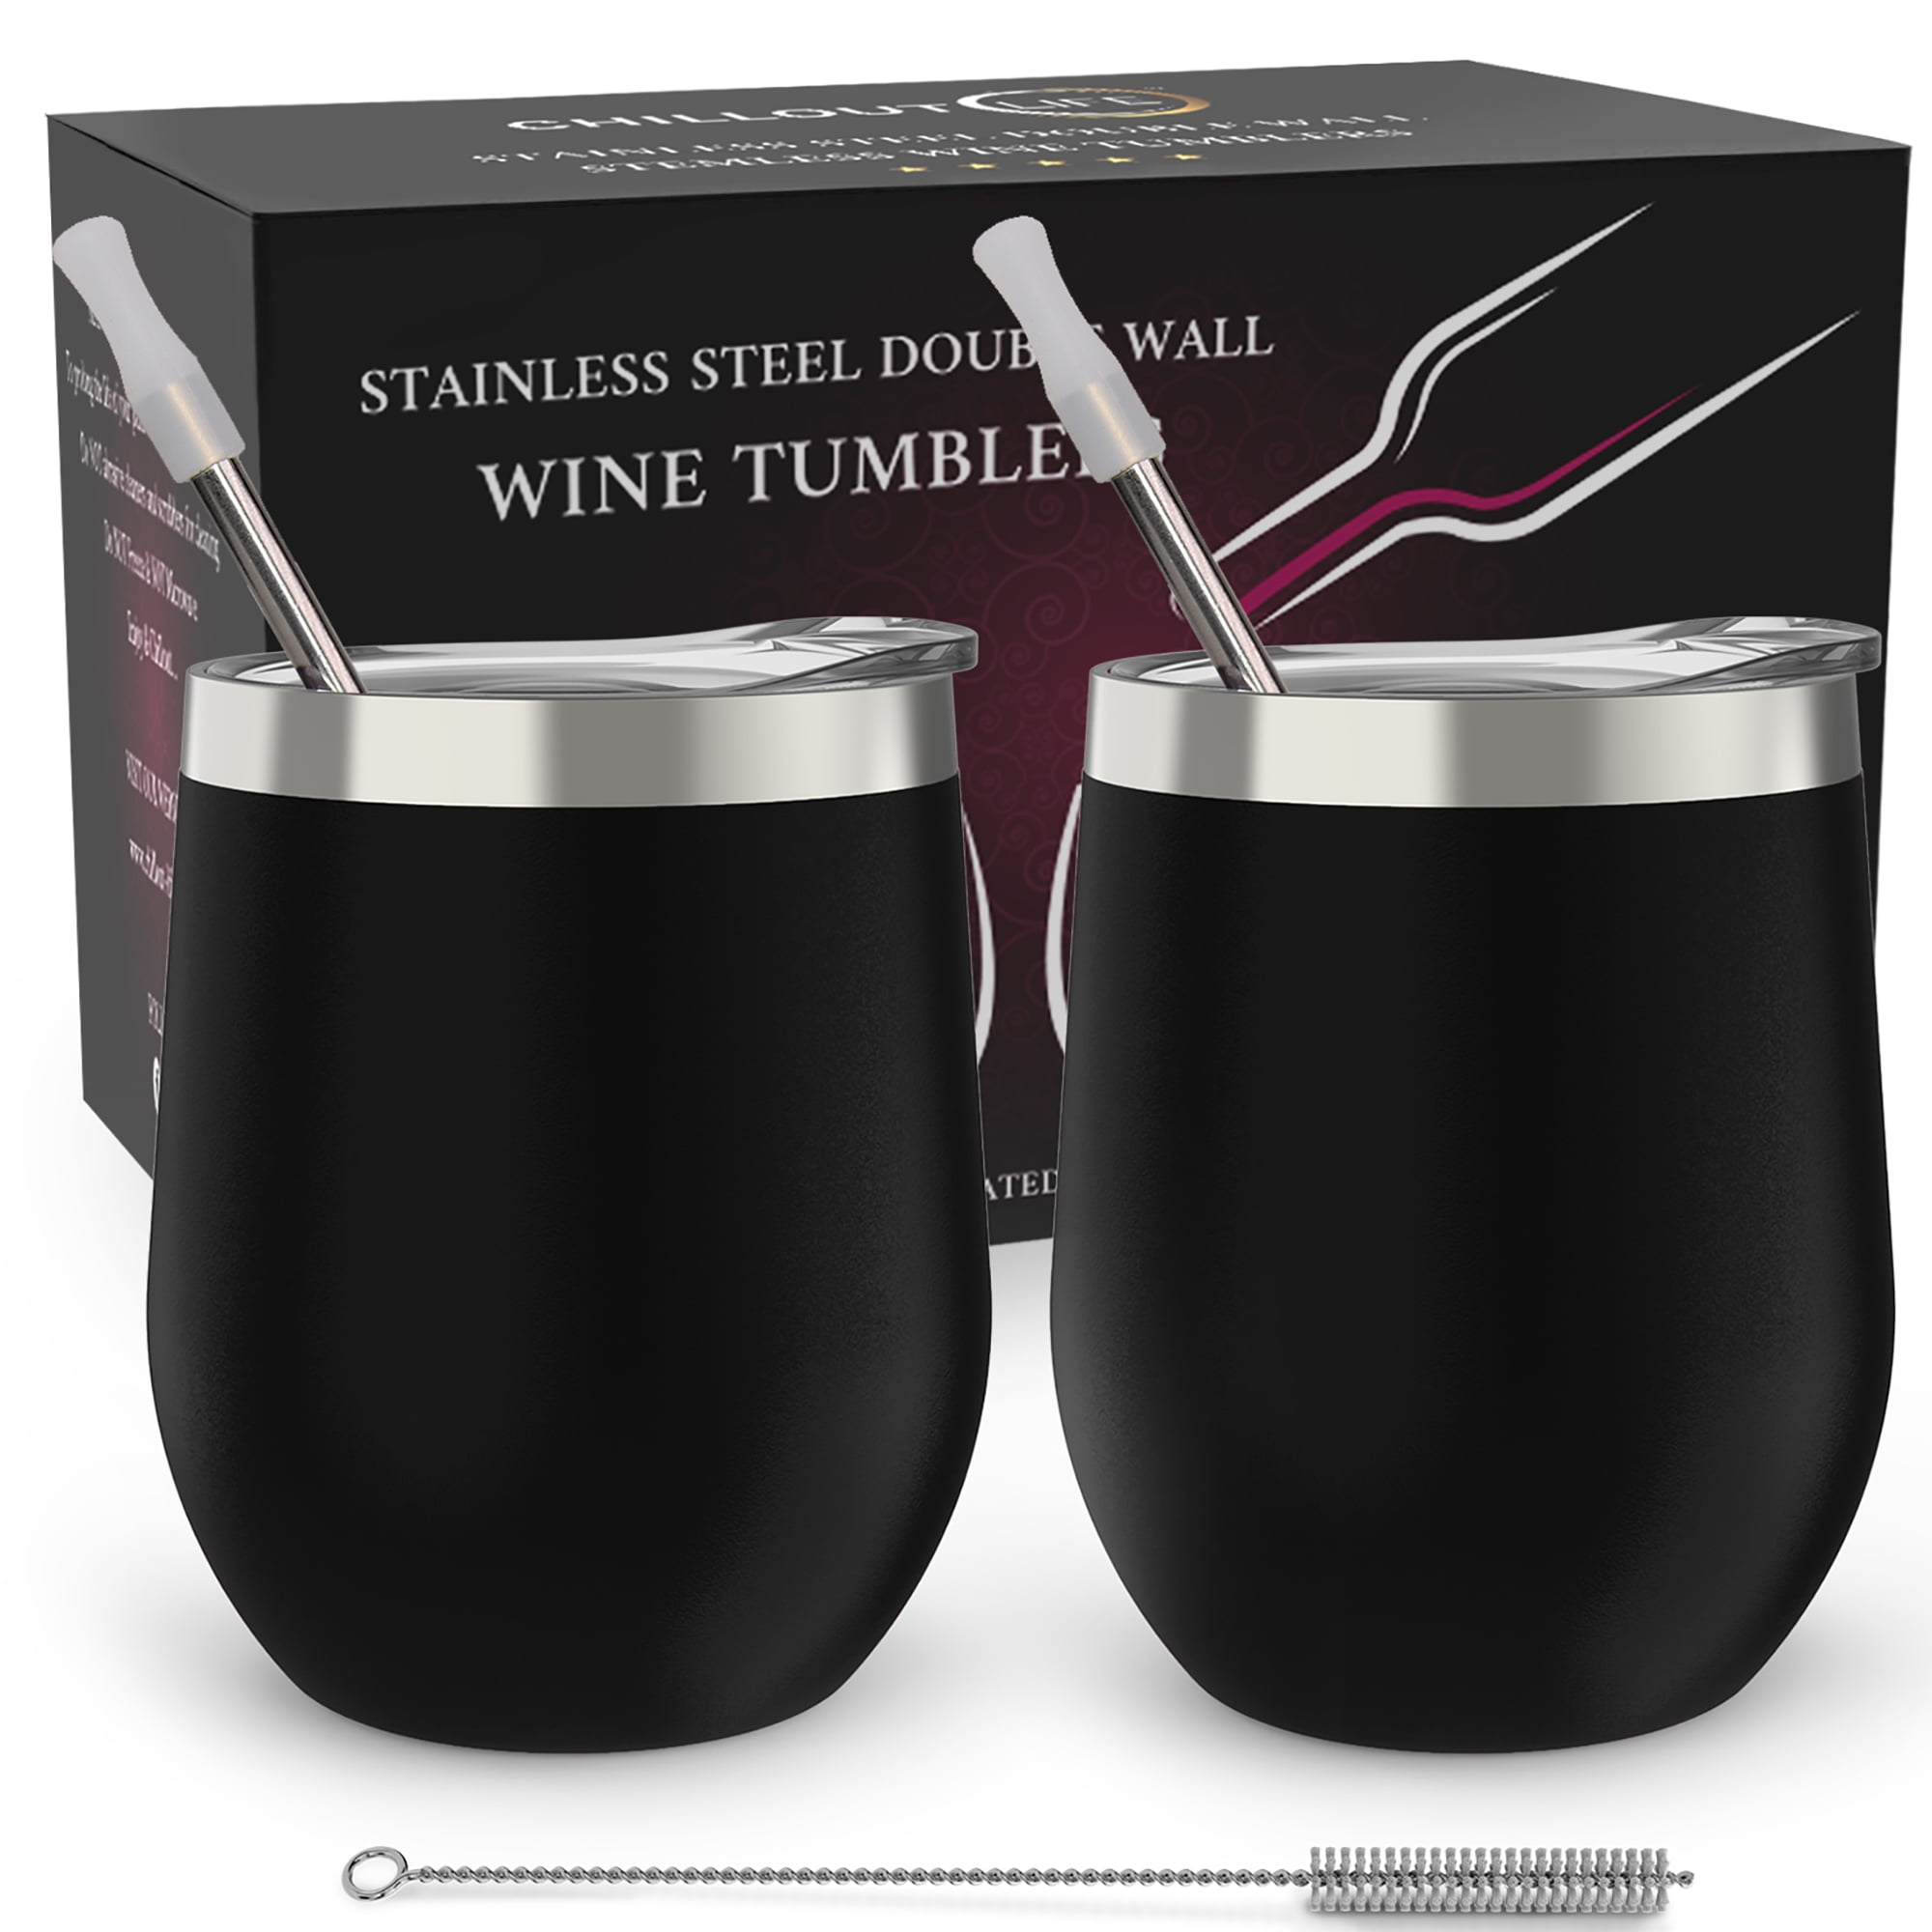 Stainless Steel Wine Glasses with Lid - 12 oz Double Wall  Insulated Outdoor Wine Tumblers - 100% Unbreakable & Stemless Glass - Wine  Tumbler Set for Outdoor : Wine, Coffee & Camping (2): Wine Glasses